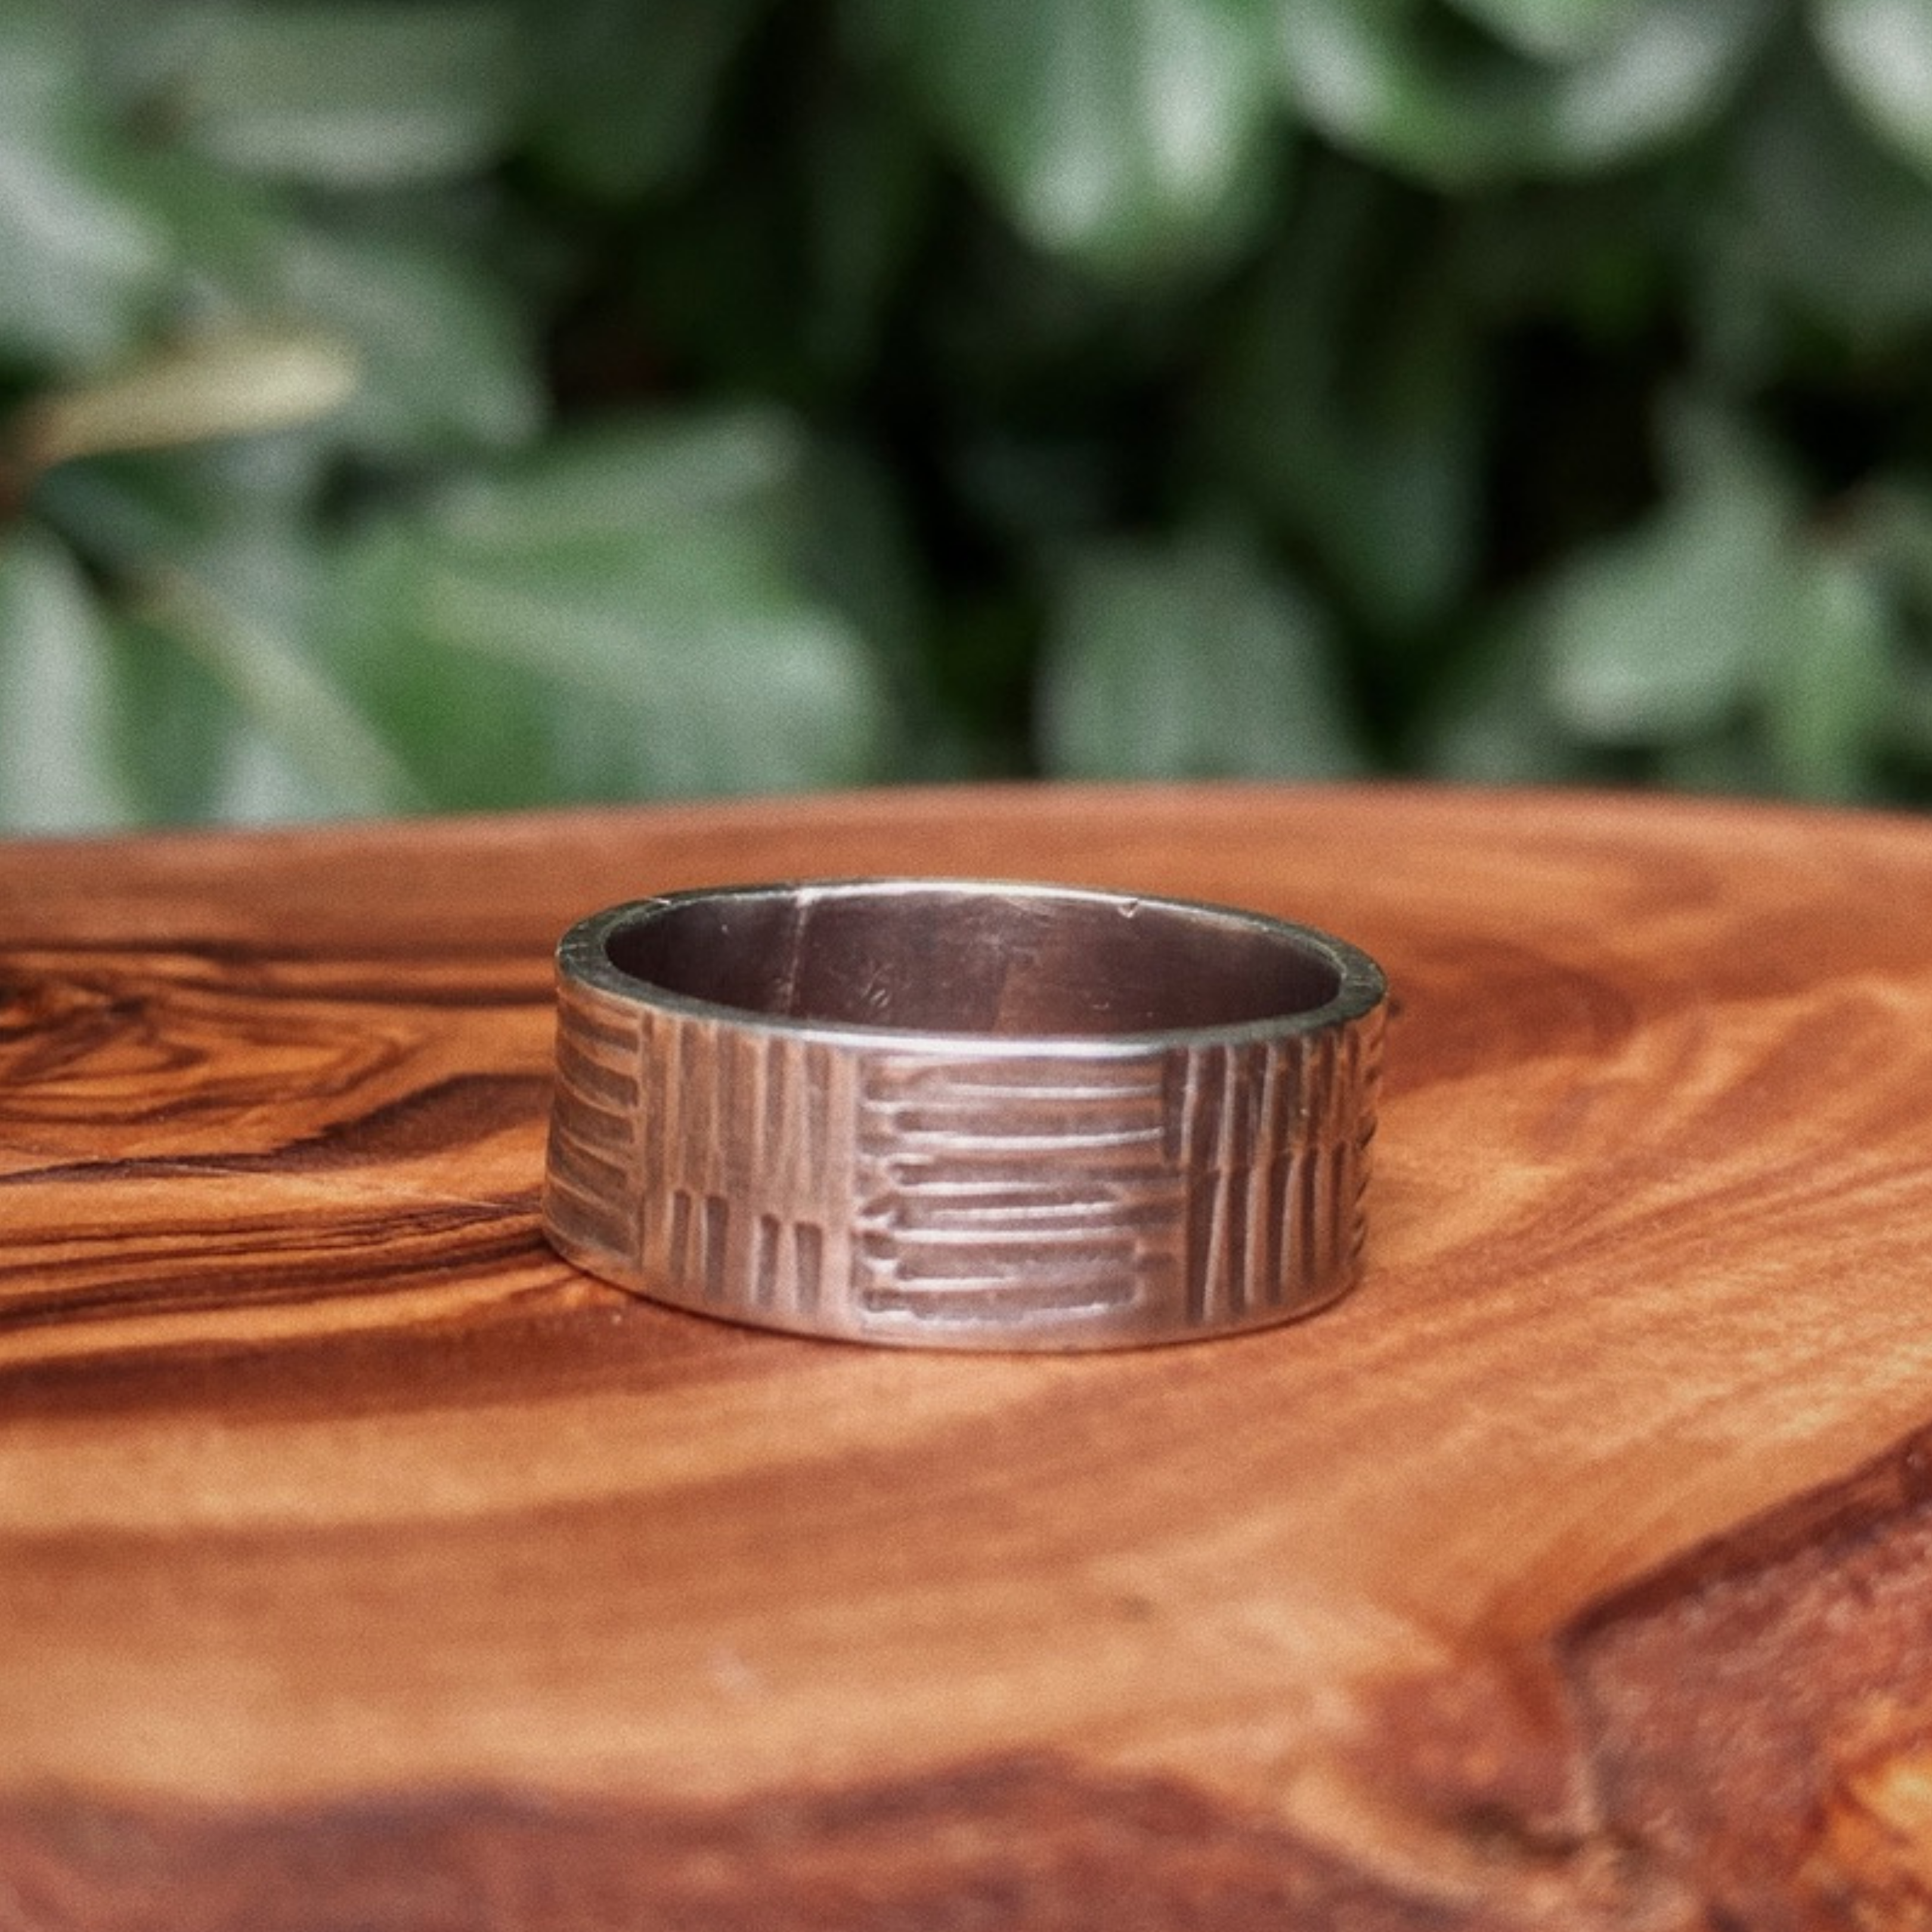 The Ogham Ring